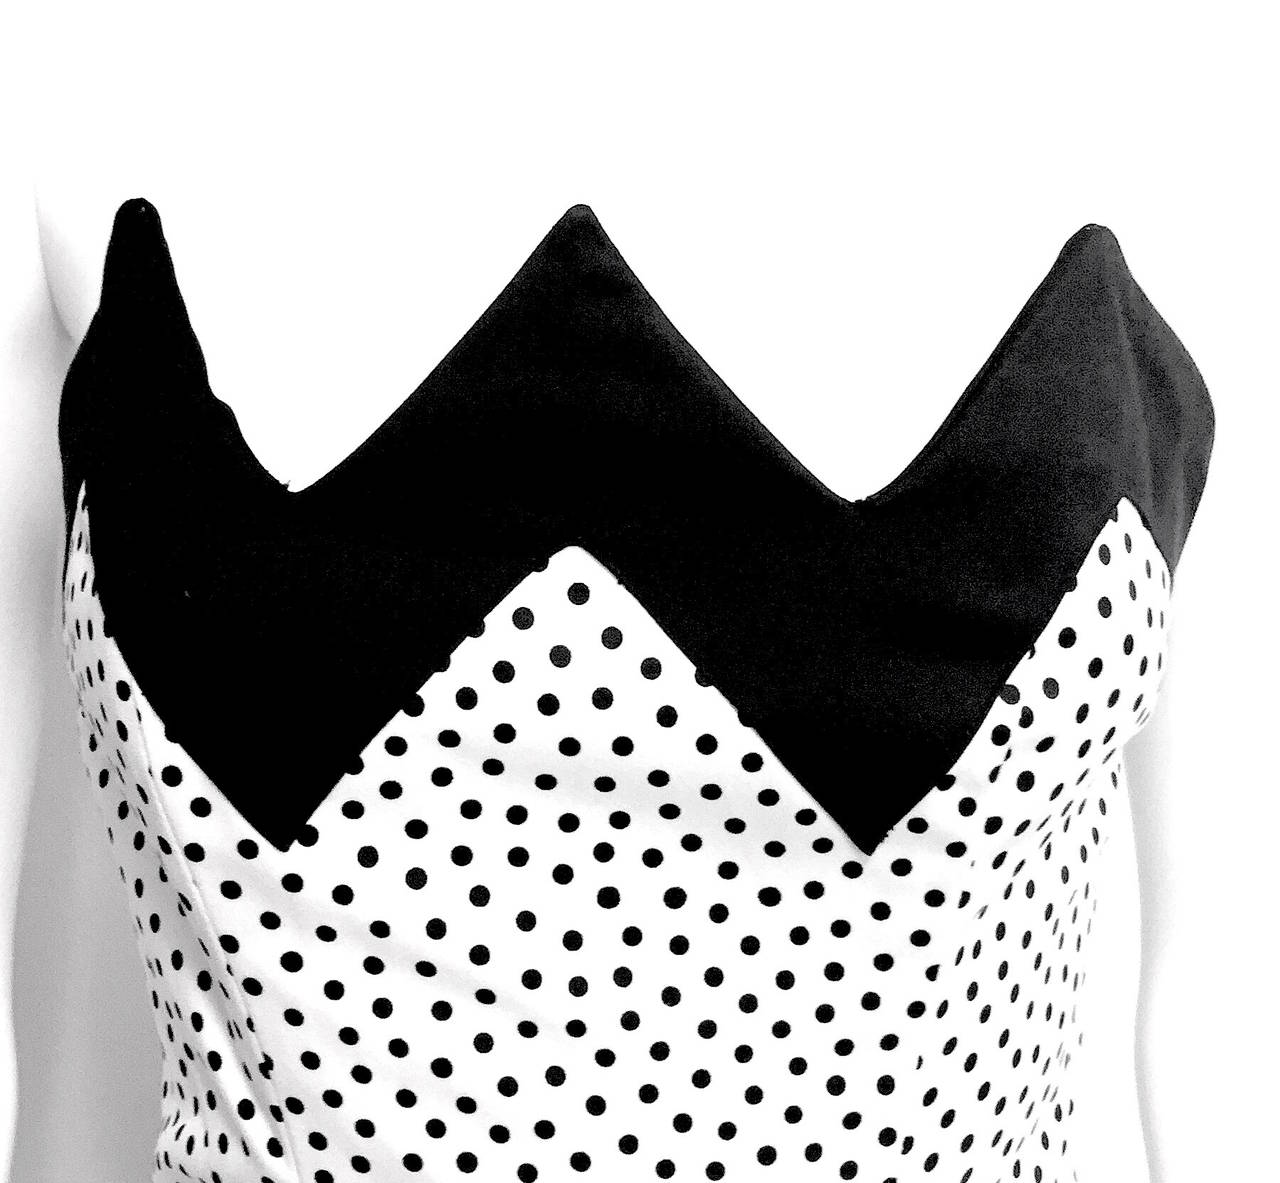 Vintage Lanvin 1980s strapless cocktail dress. Timeless and whimsical, the dress features a black zig zag neckline, fitted bodice, boning, and is white with small black polka dots. It includes a black fishnet underlay and an a-line skirt. It has a